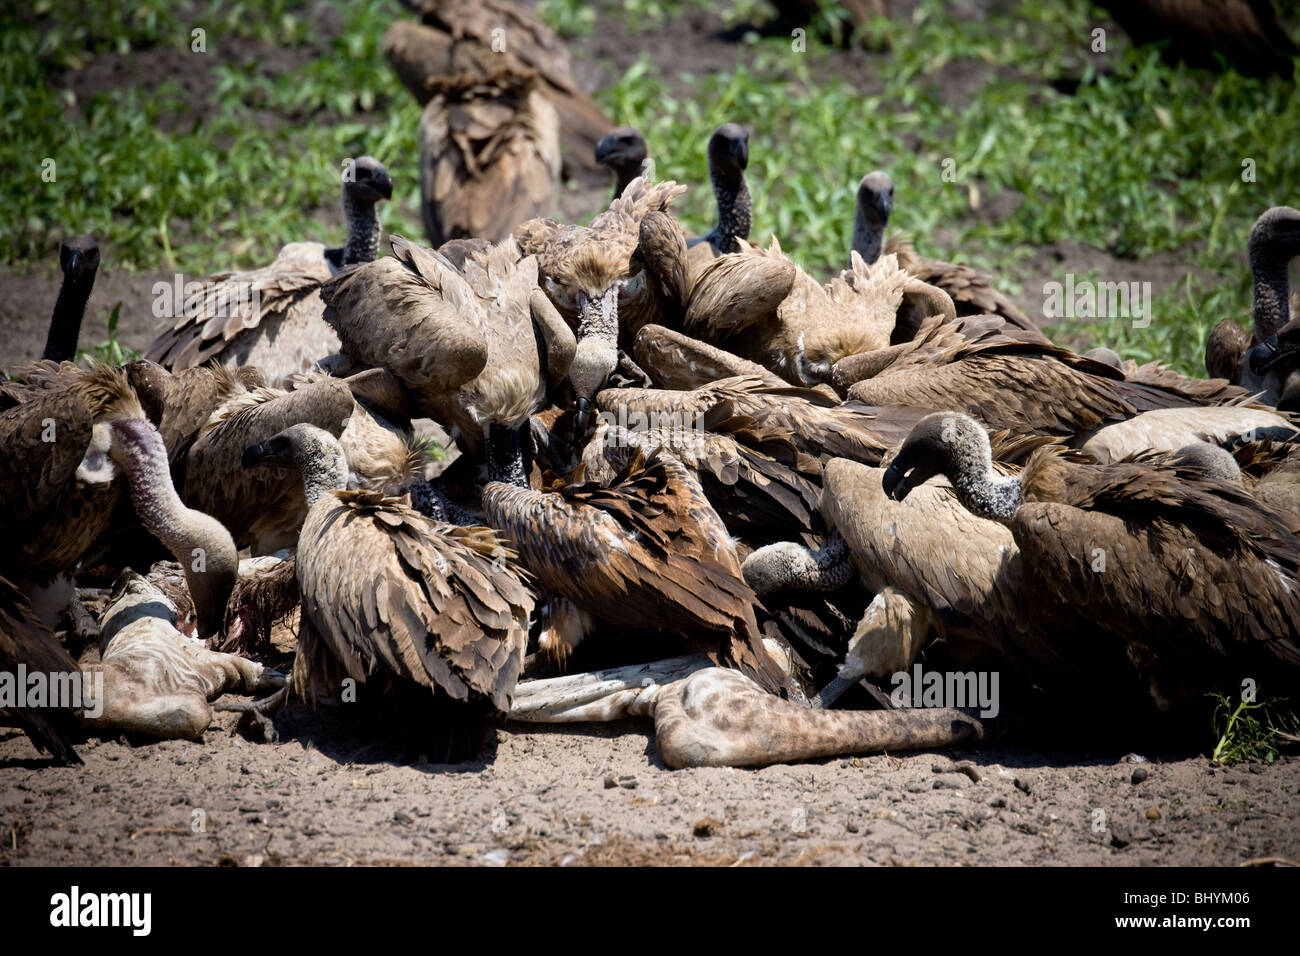 African White-Backed Vultures eating the remains of a Giraffe, Selous Game Reserve, Tanzania, East Africa Stock Photo